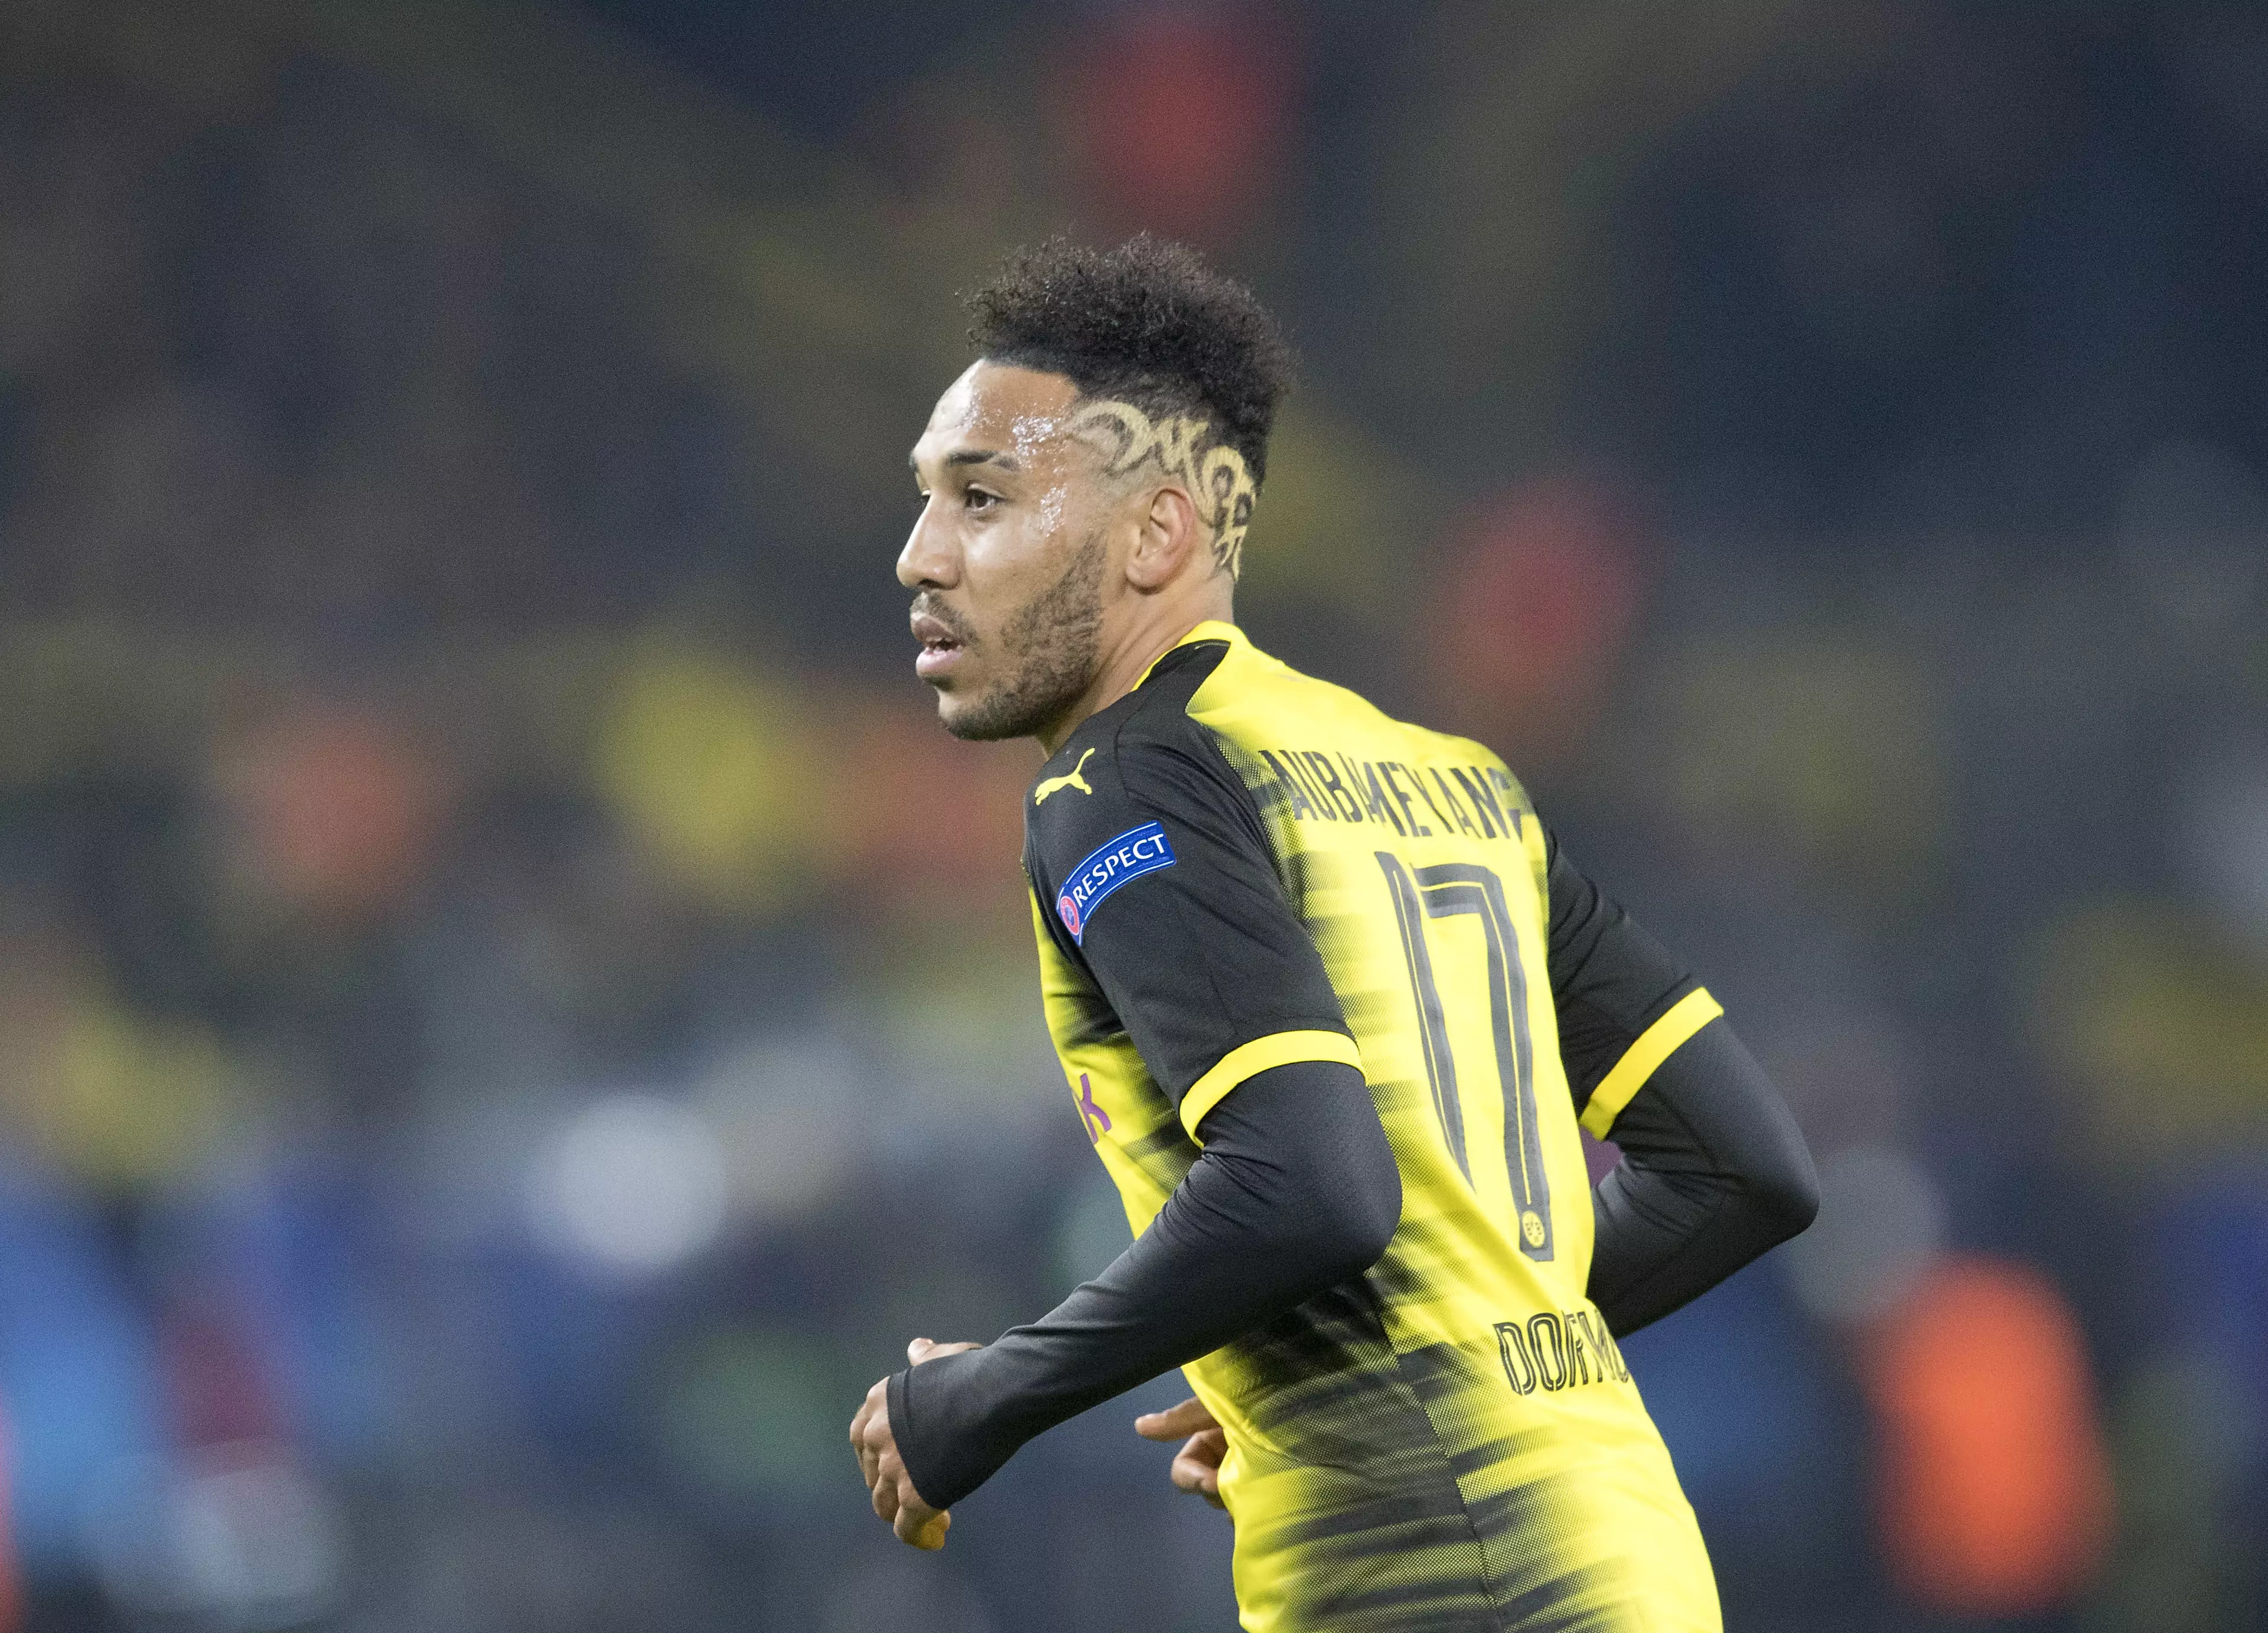 Aubameyang has long been linked with moves away from Dortmund. Image: PA Images.